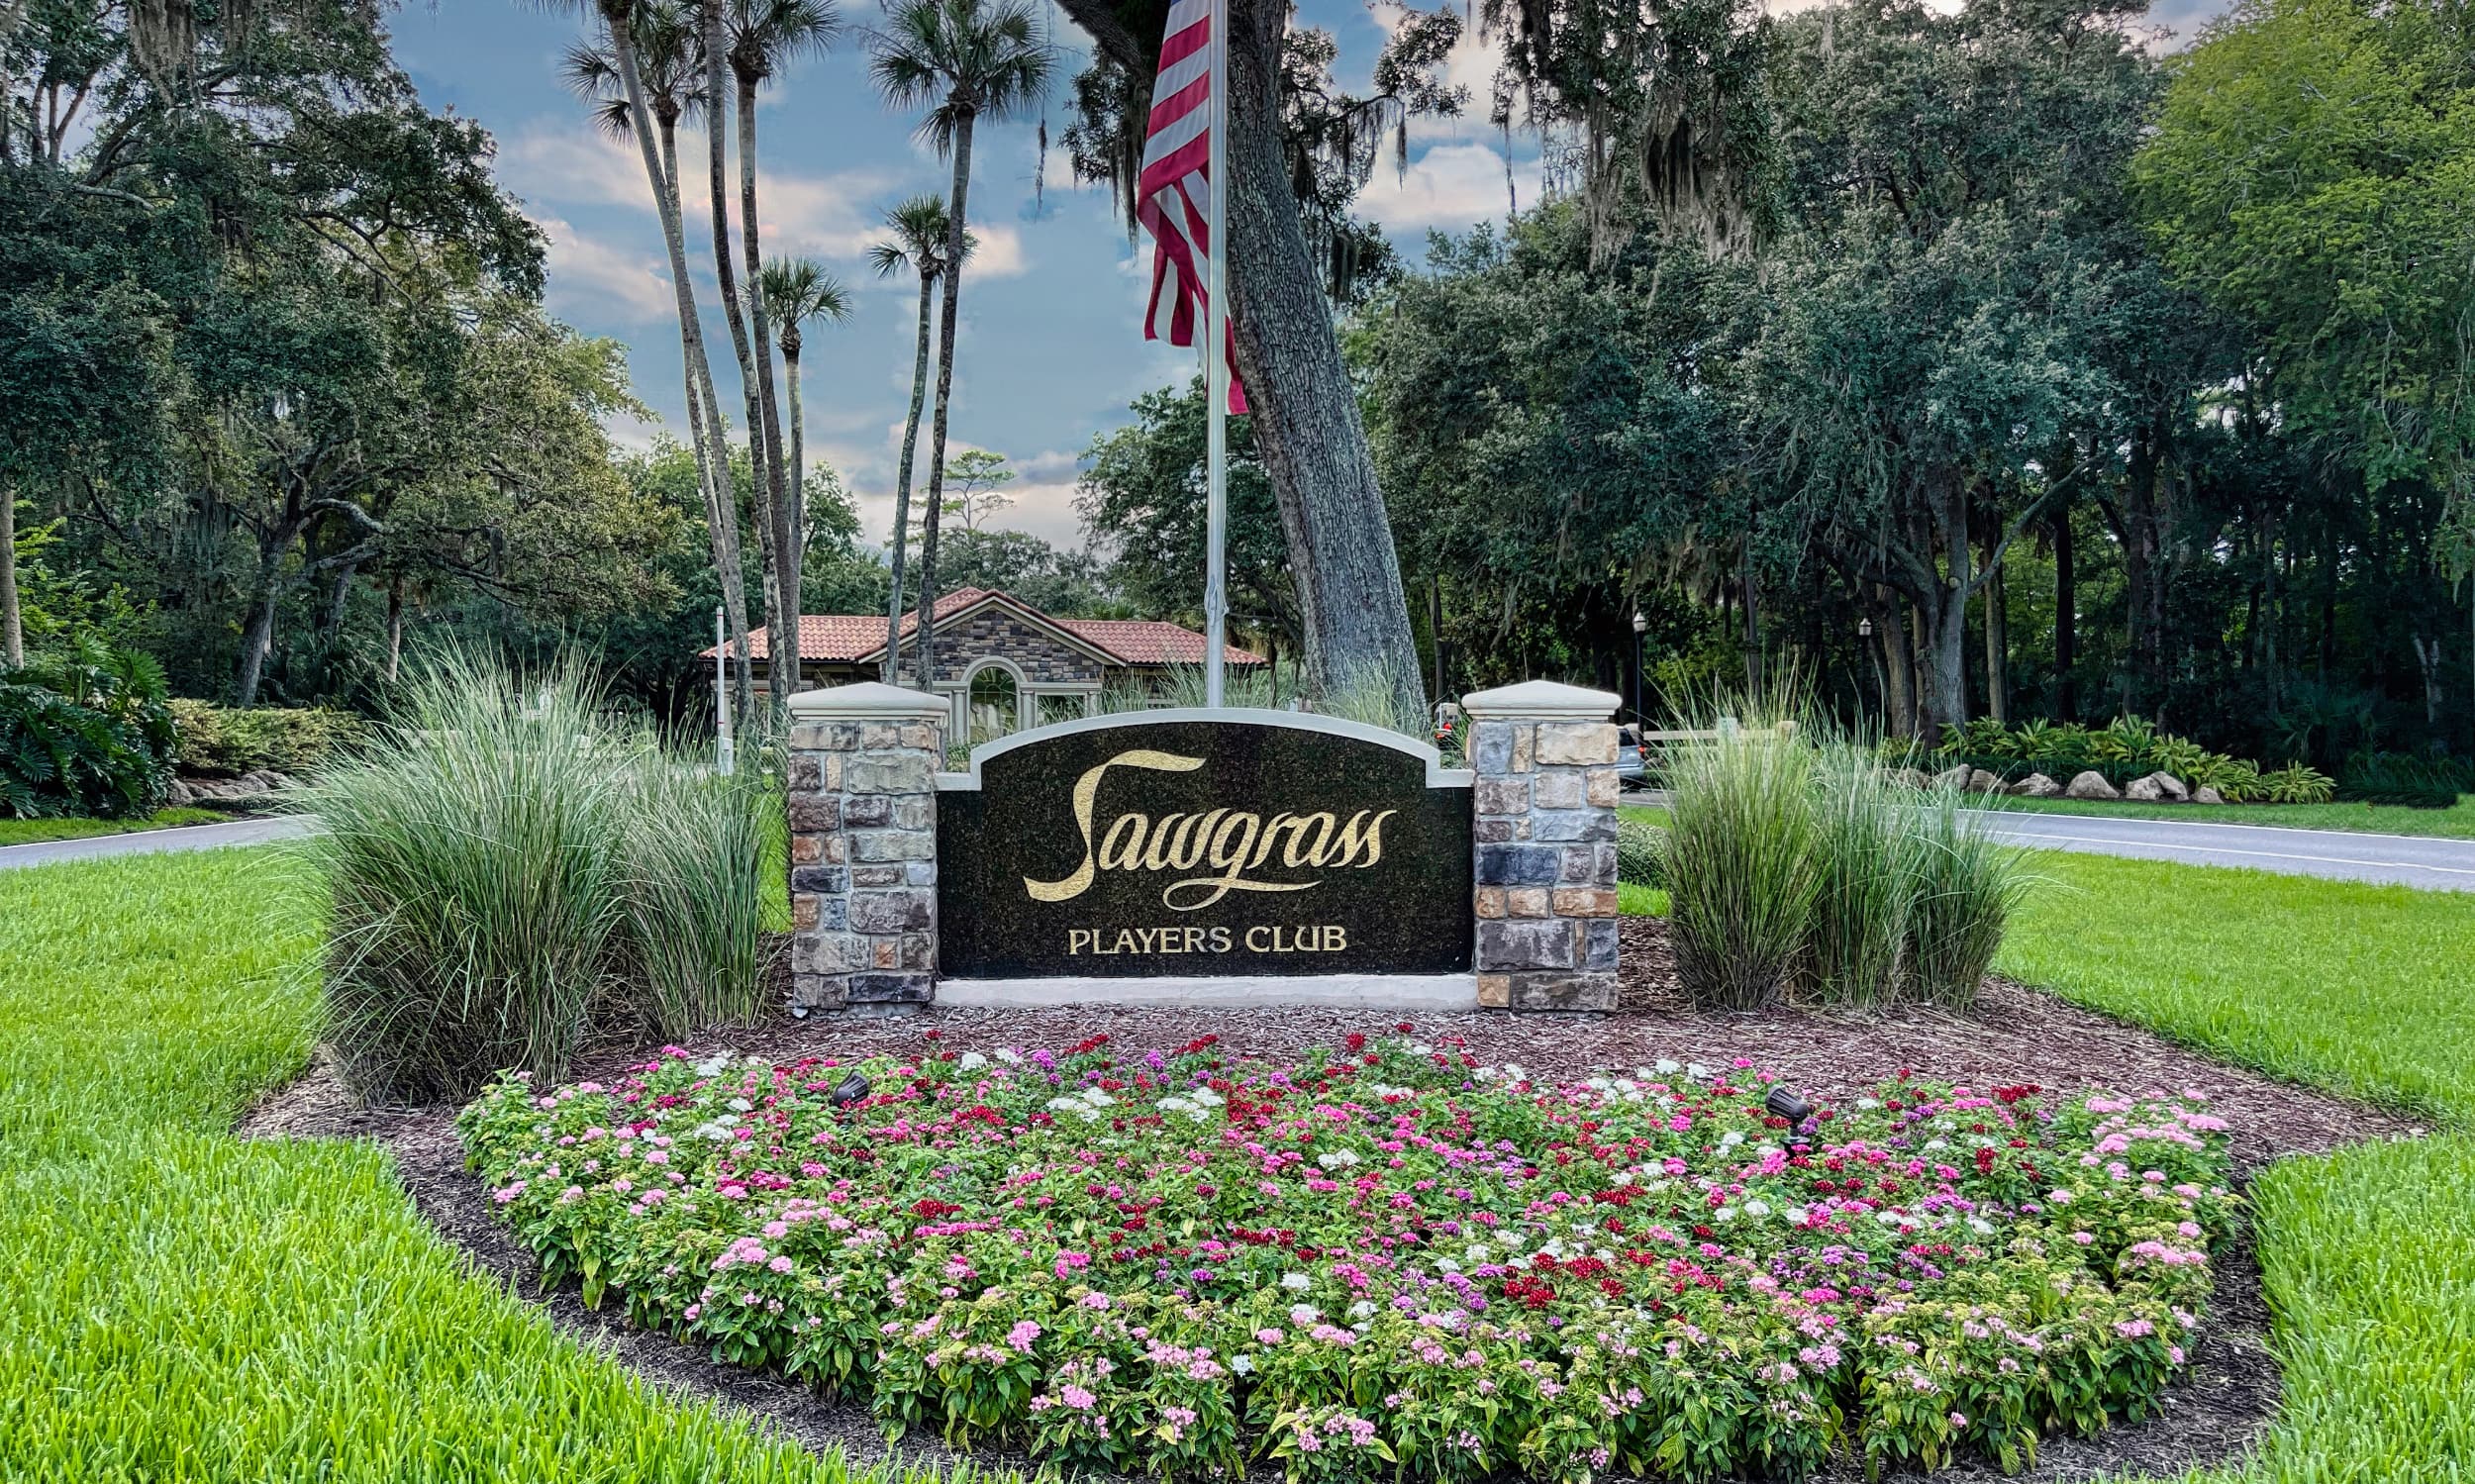 TPC Sawgrass sign at the entrance of the gate